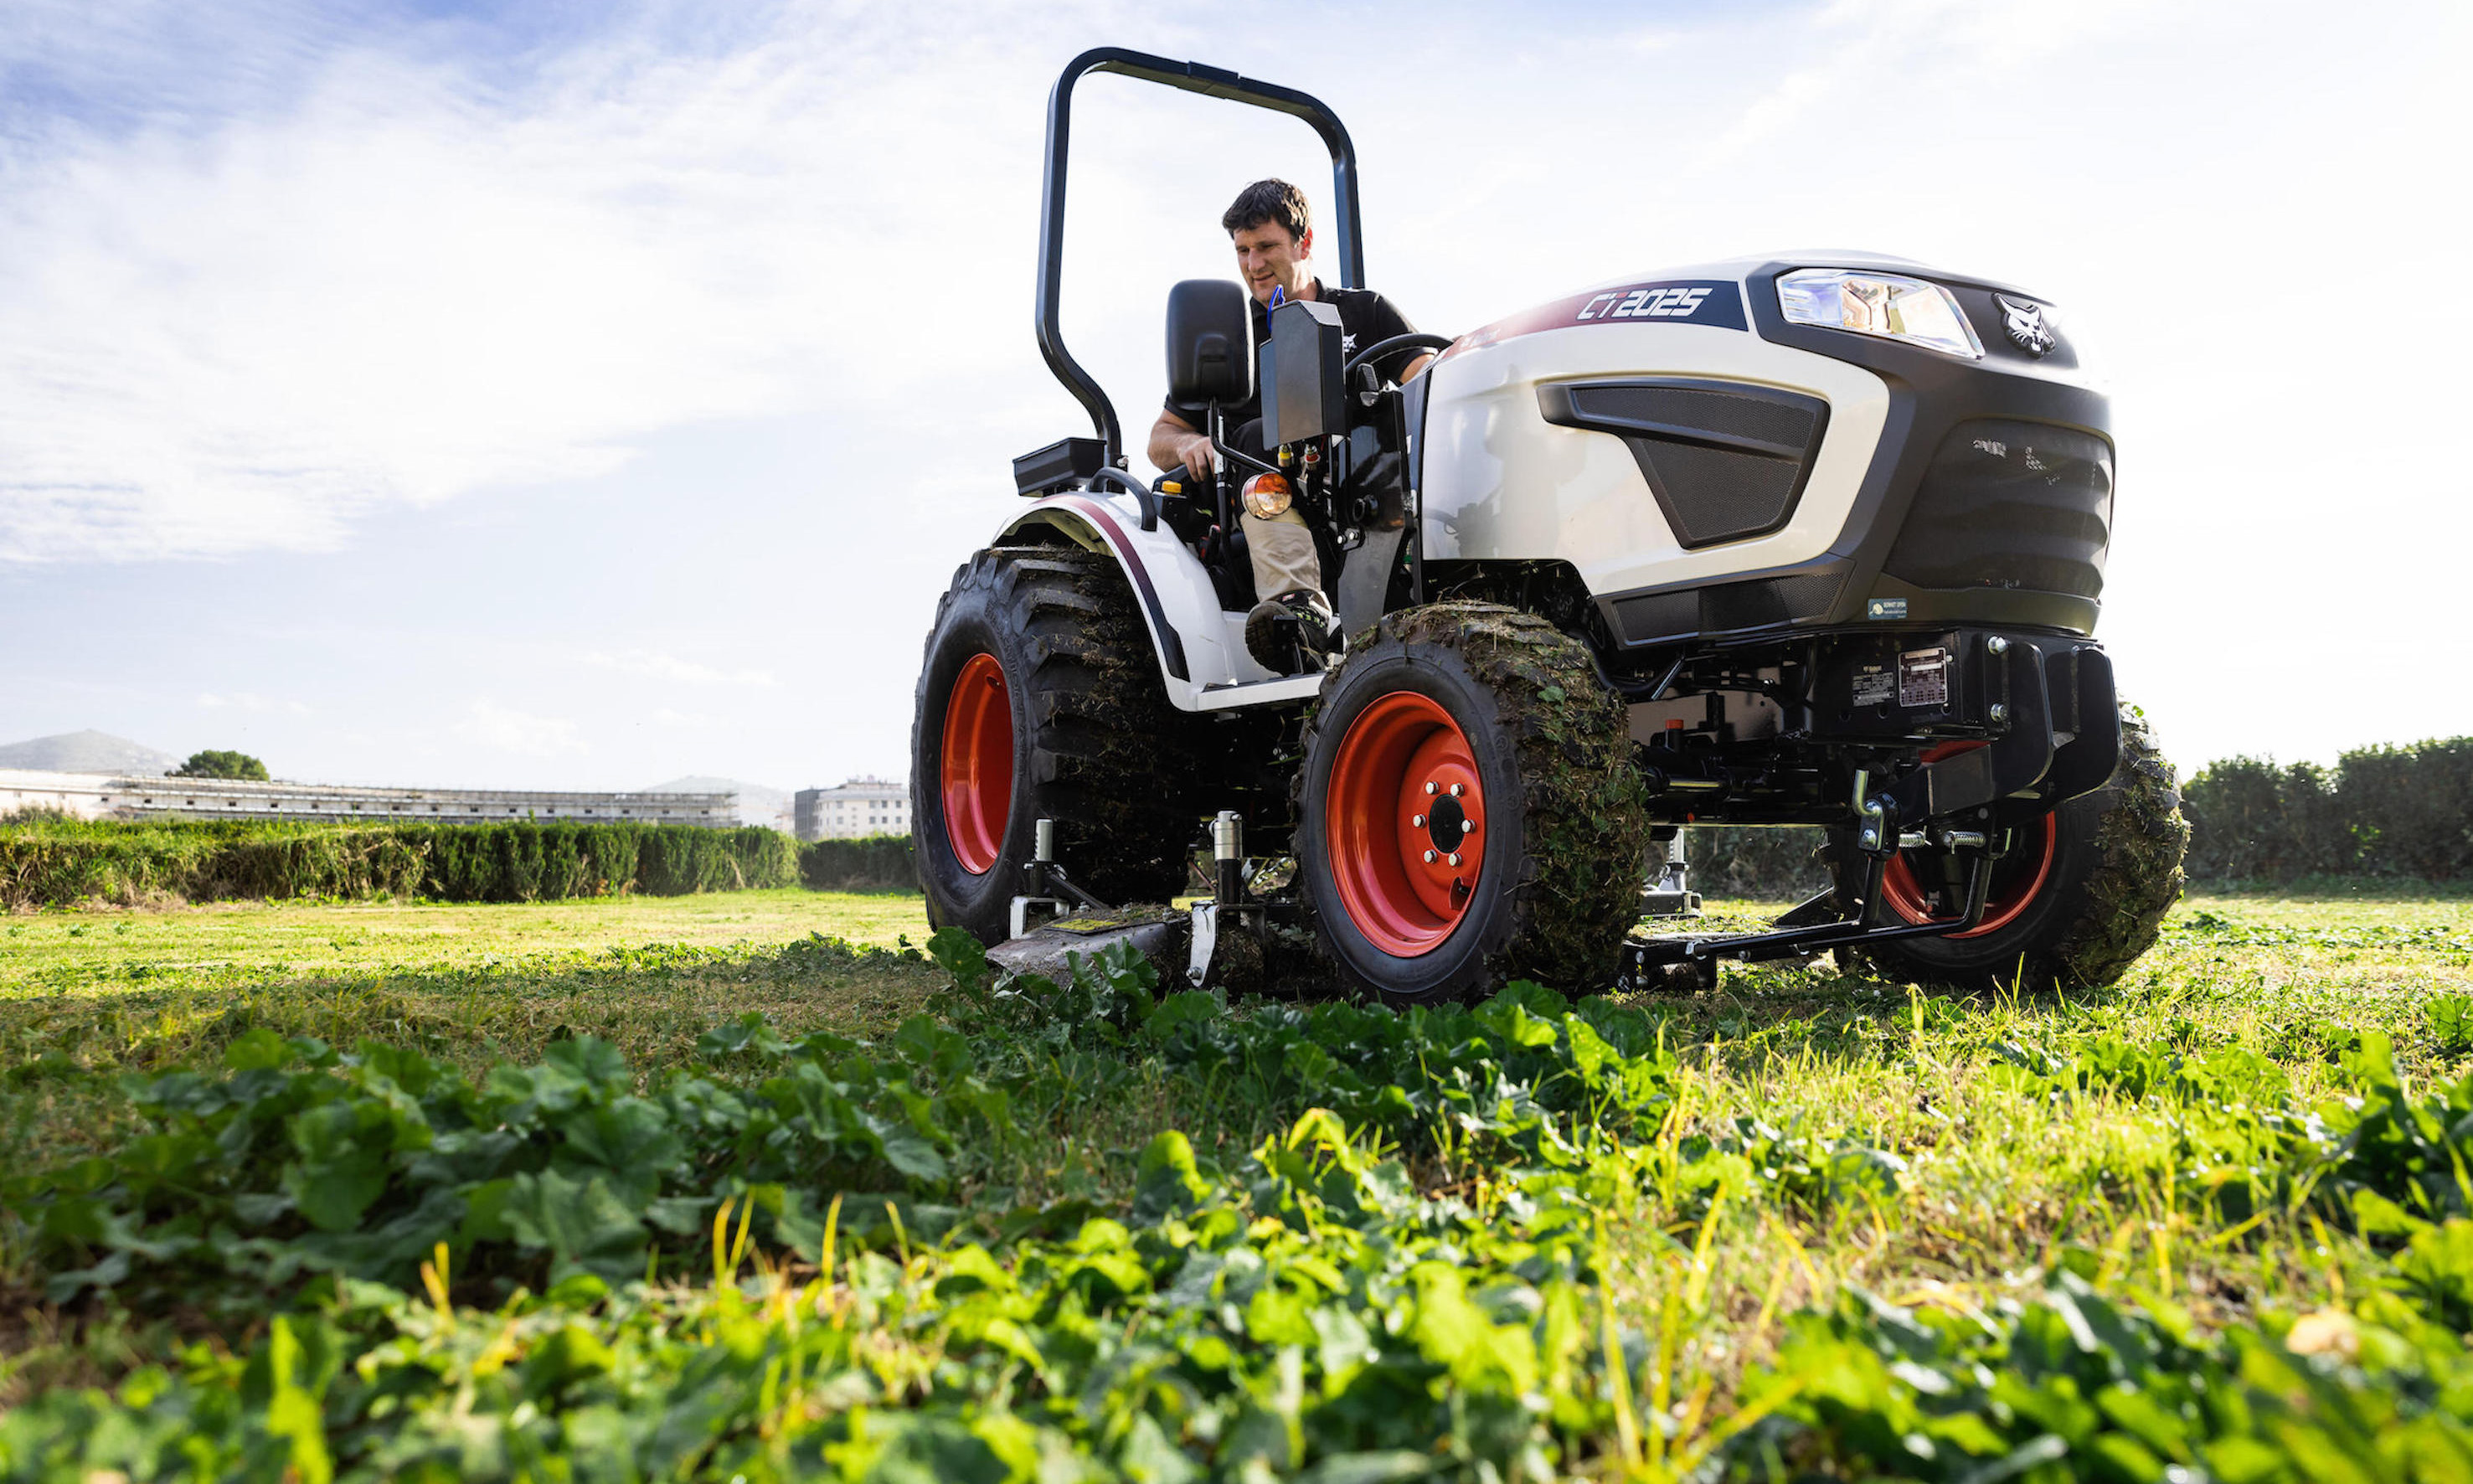 Bobcat introduces new compact tractor line-up   